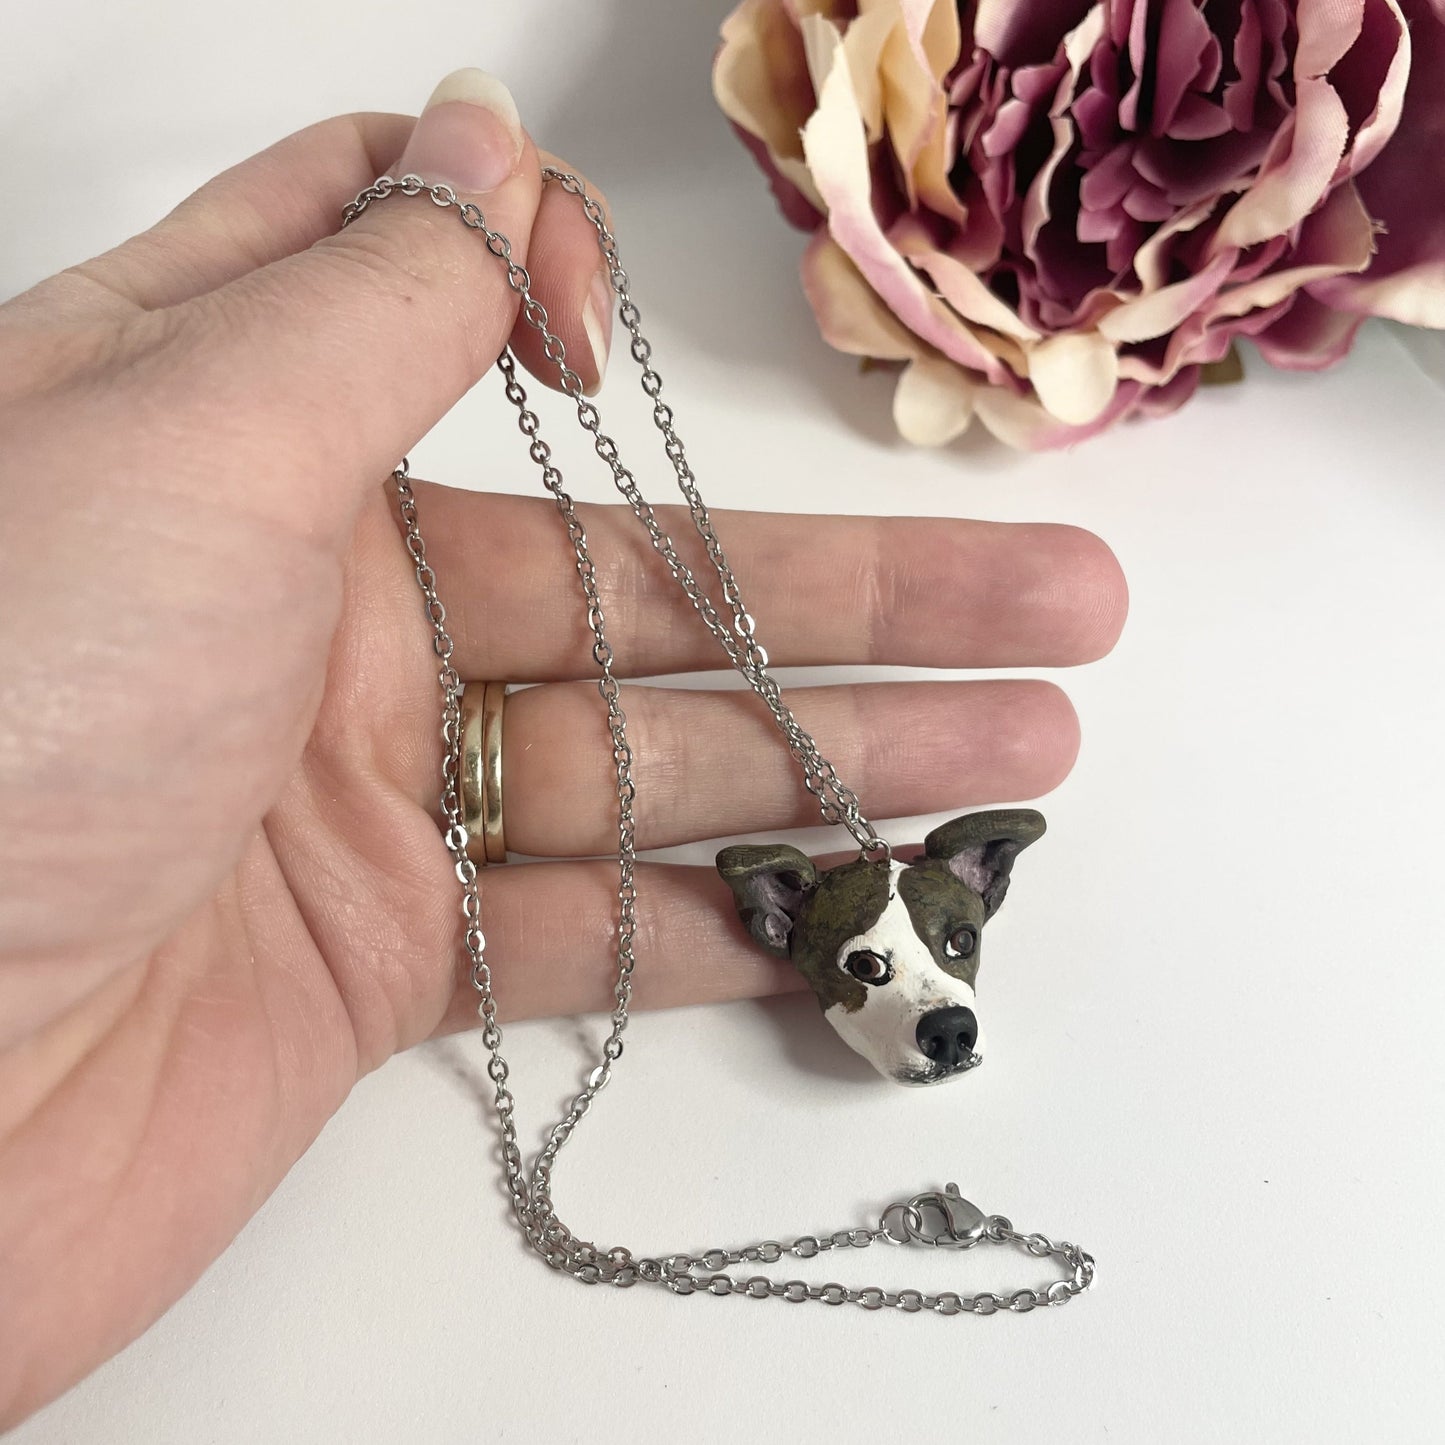 Handmade custom dog face necklace pendant on chain, held in front of faux pink flower.